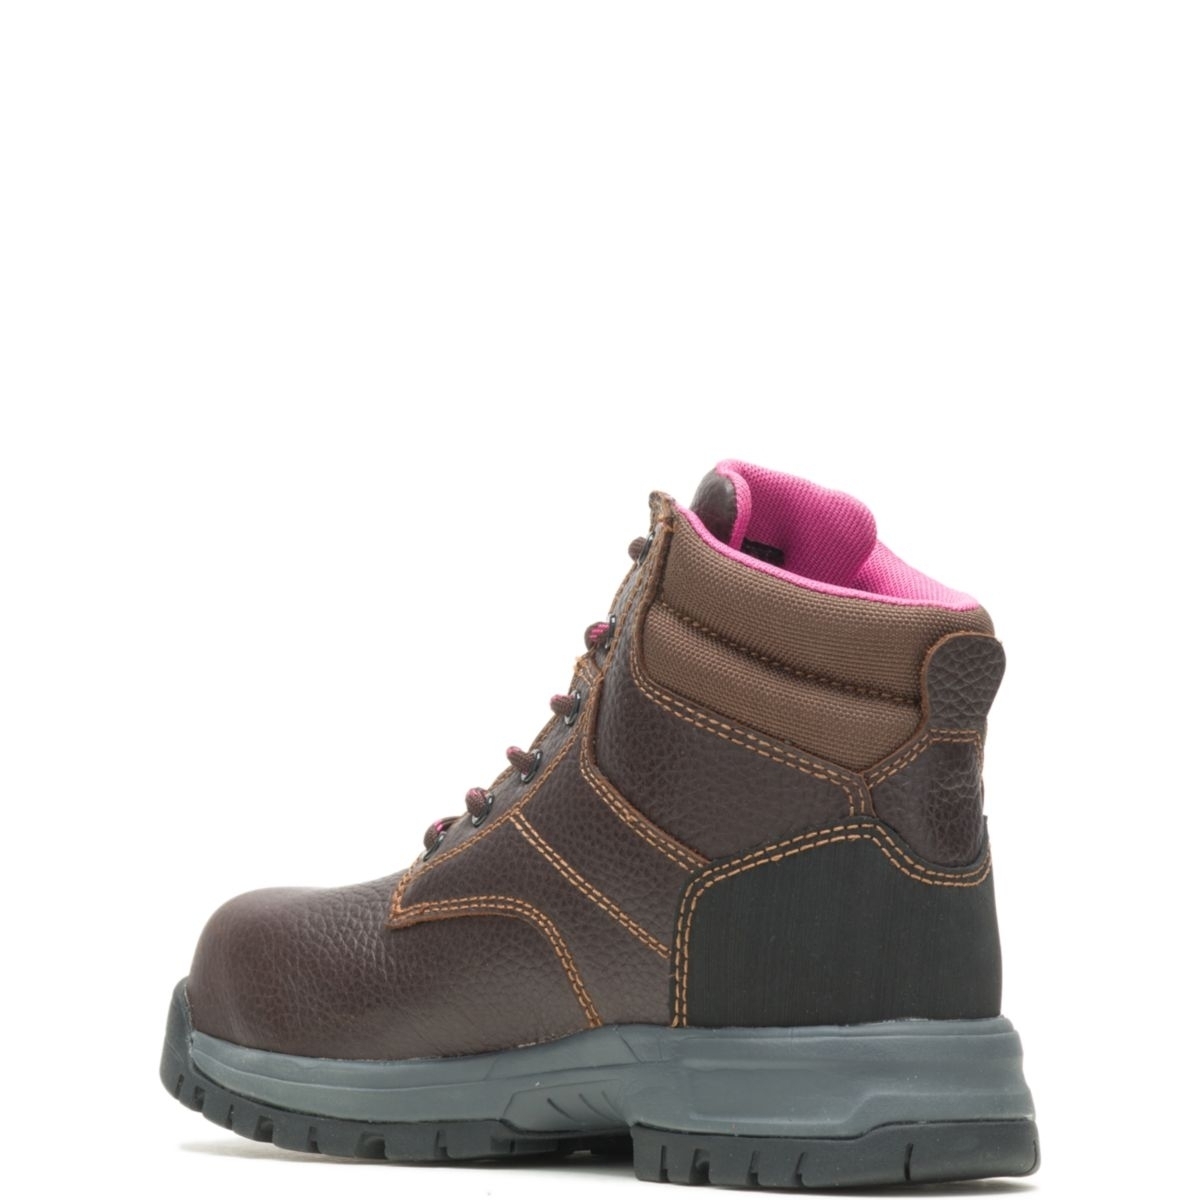 WOLVERINE Women's Piper Composite Toe Work Boot Brown - W10180 BROWN - BROWN, 8 Wide